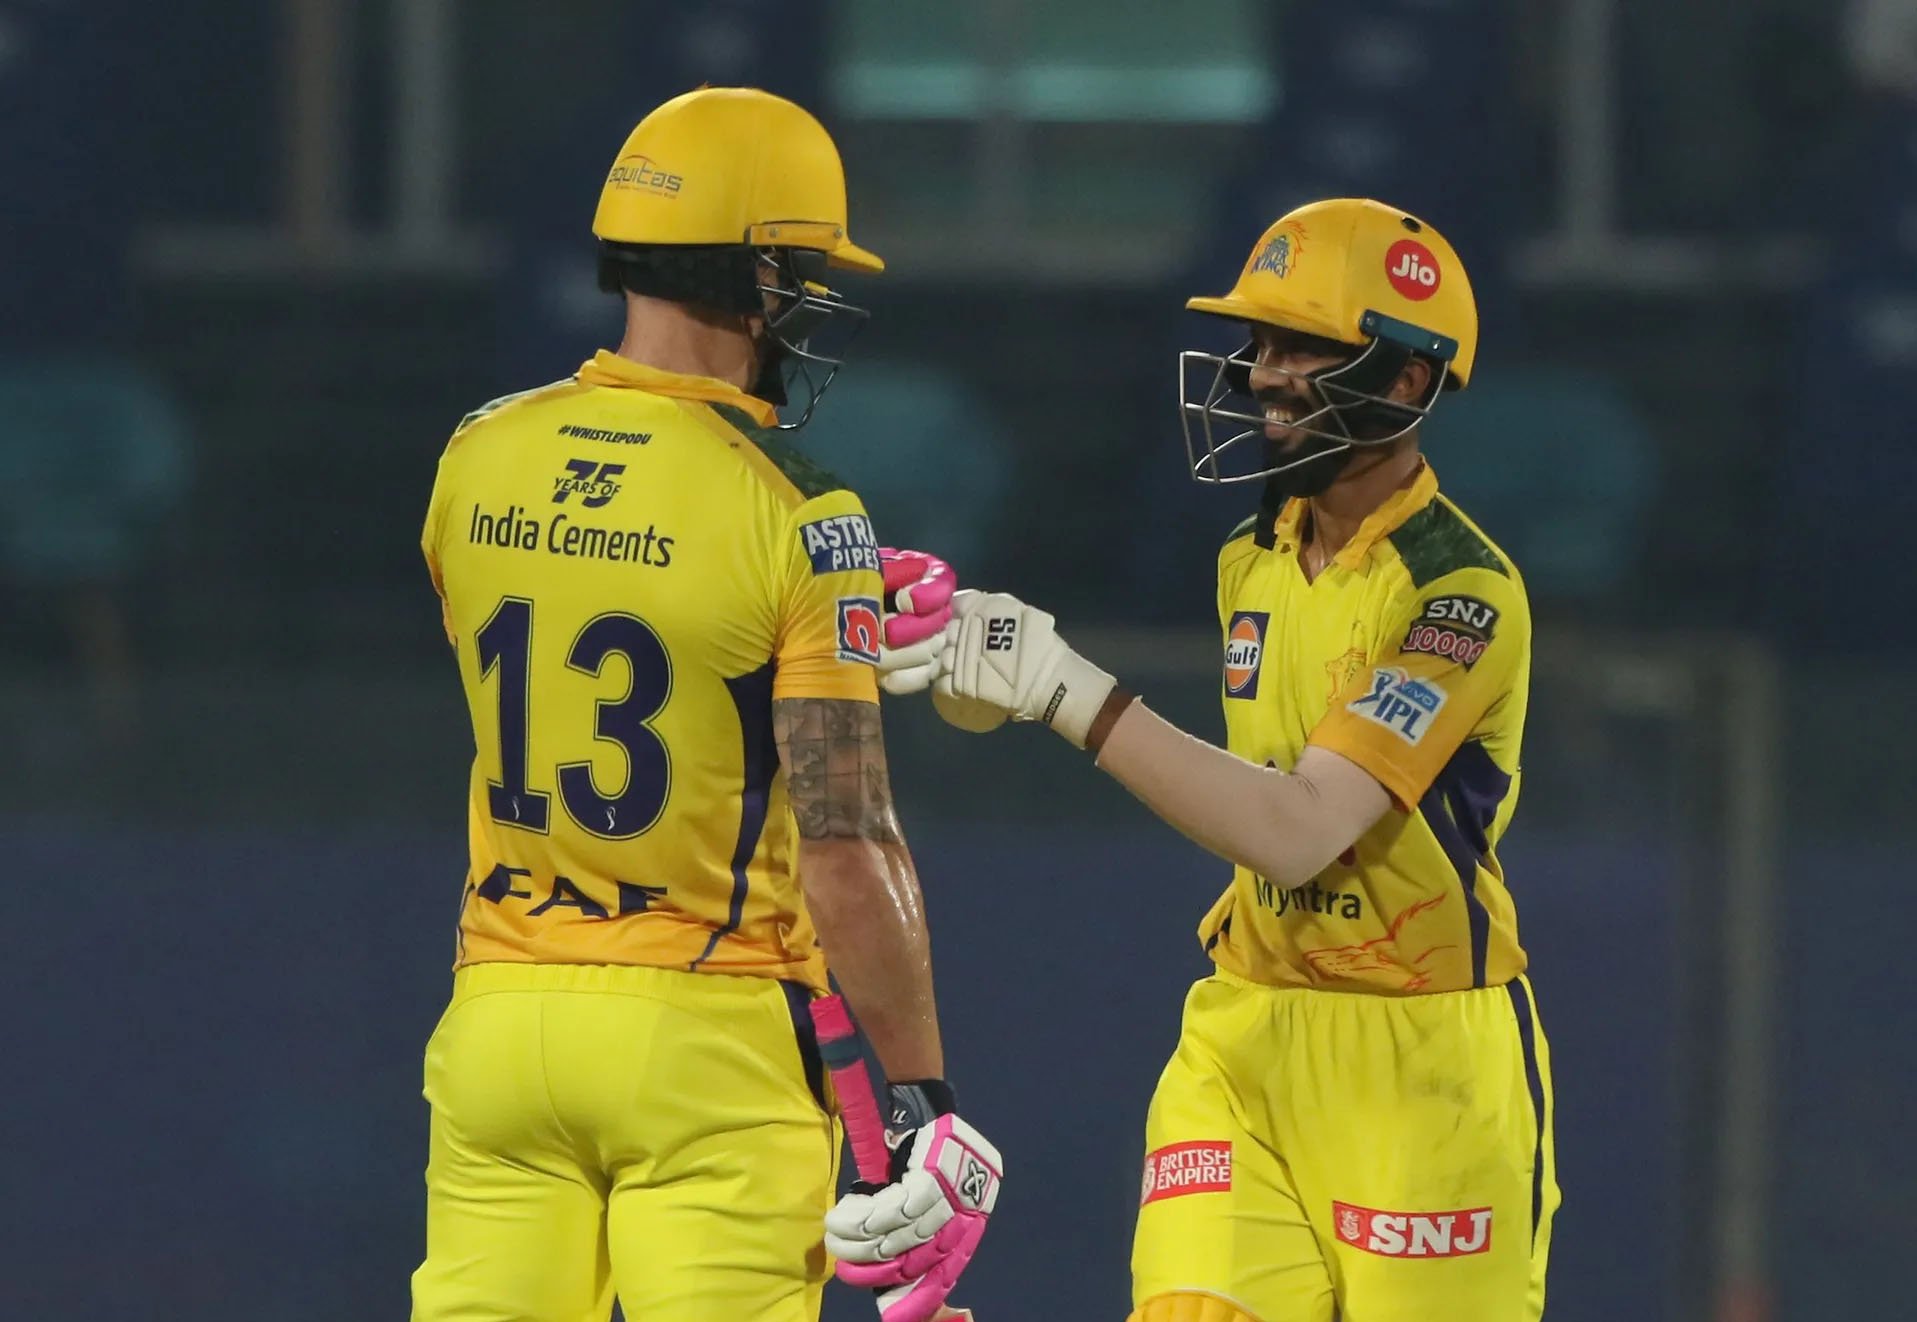 Faf du Plessis and Ruturaj Gaikwad likely to be retained by CSK | BCCI